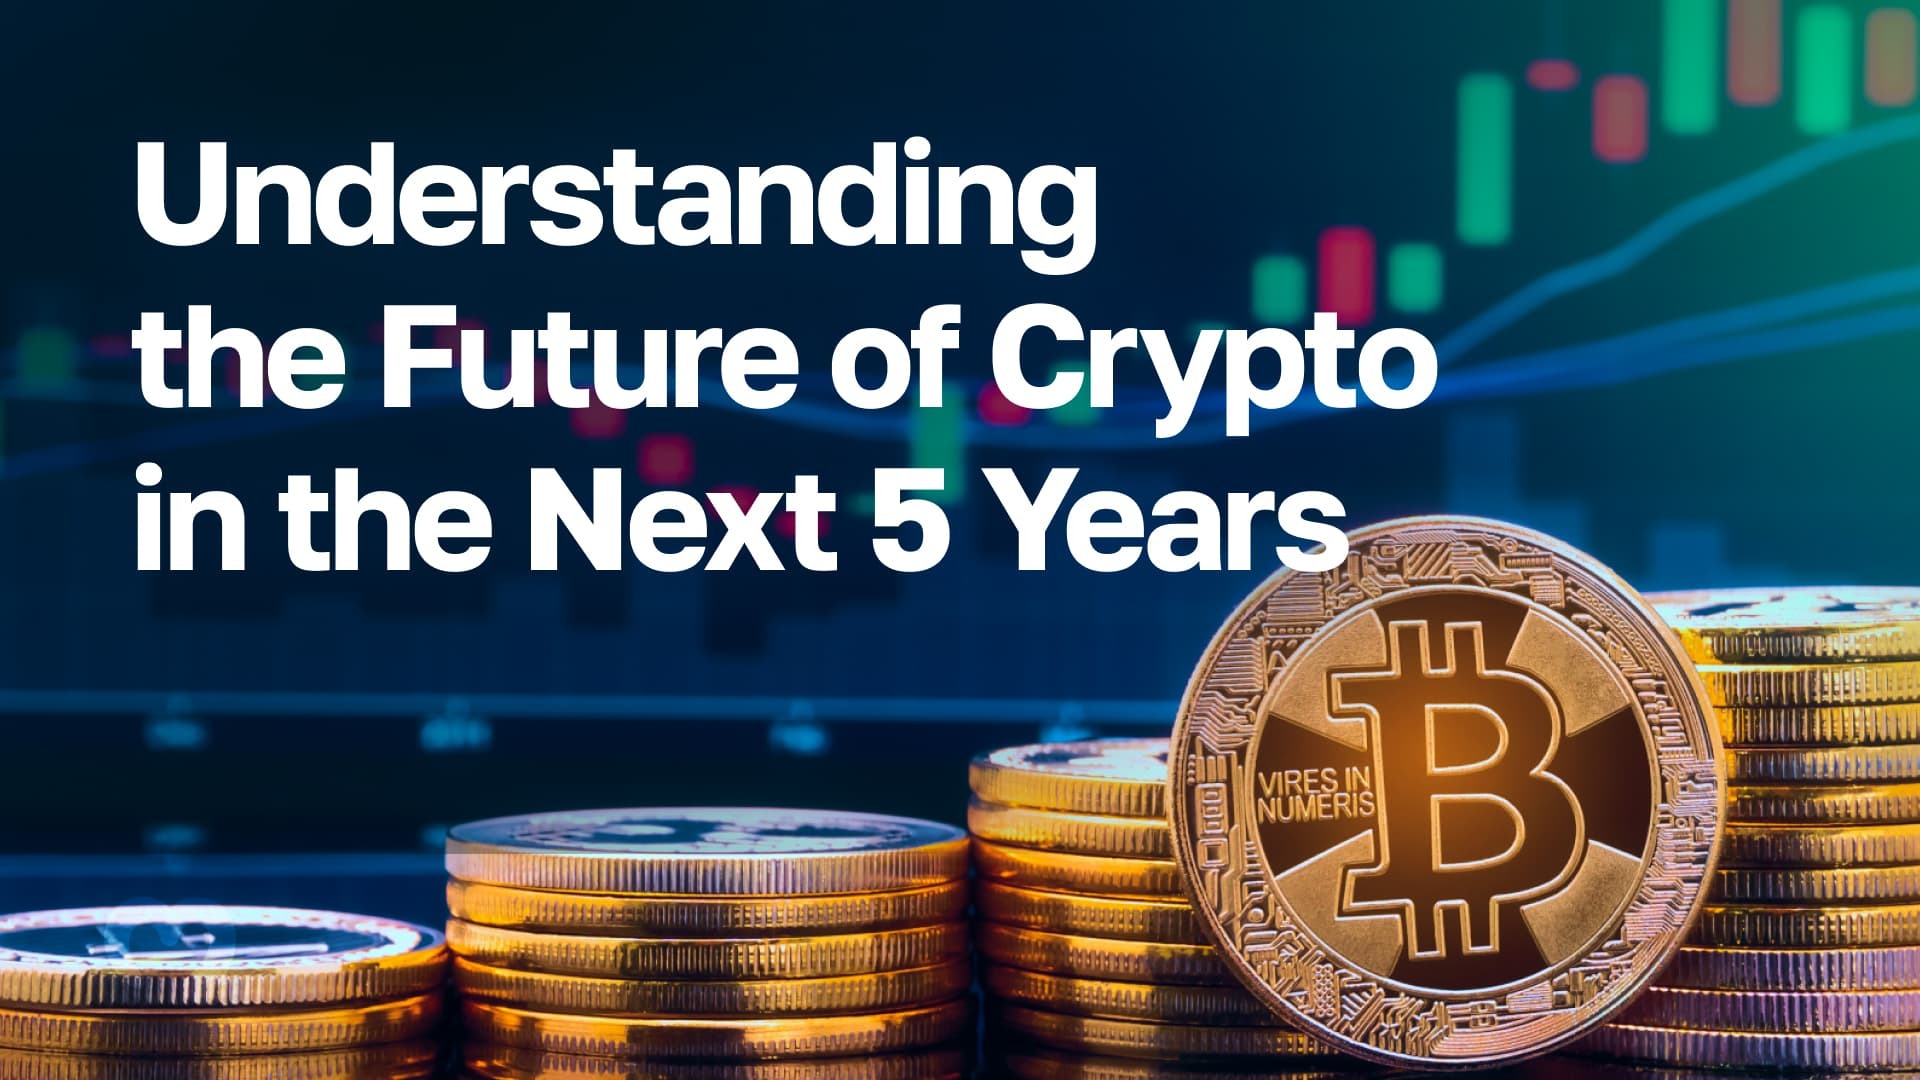 Understanding the Future of Crypto in the Next 5 Years